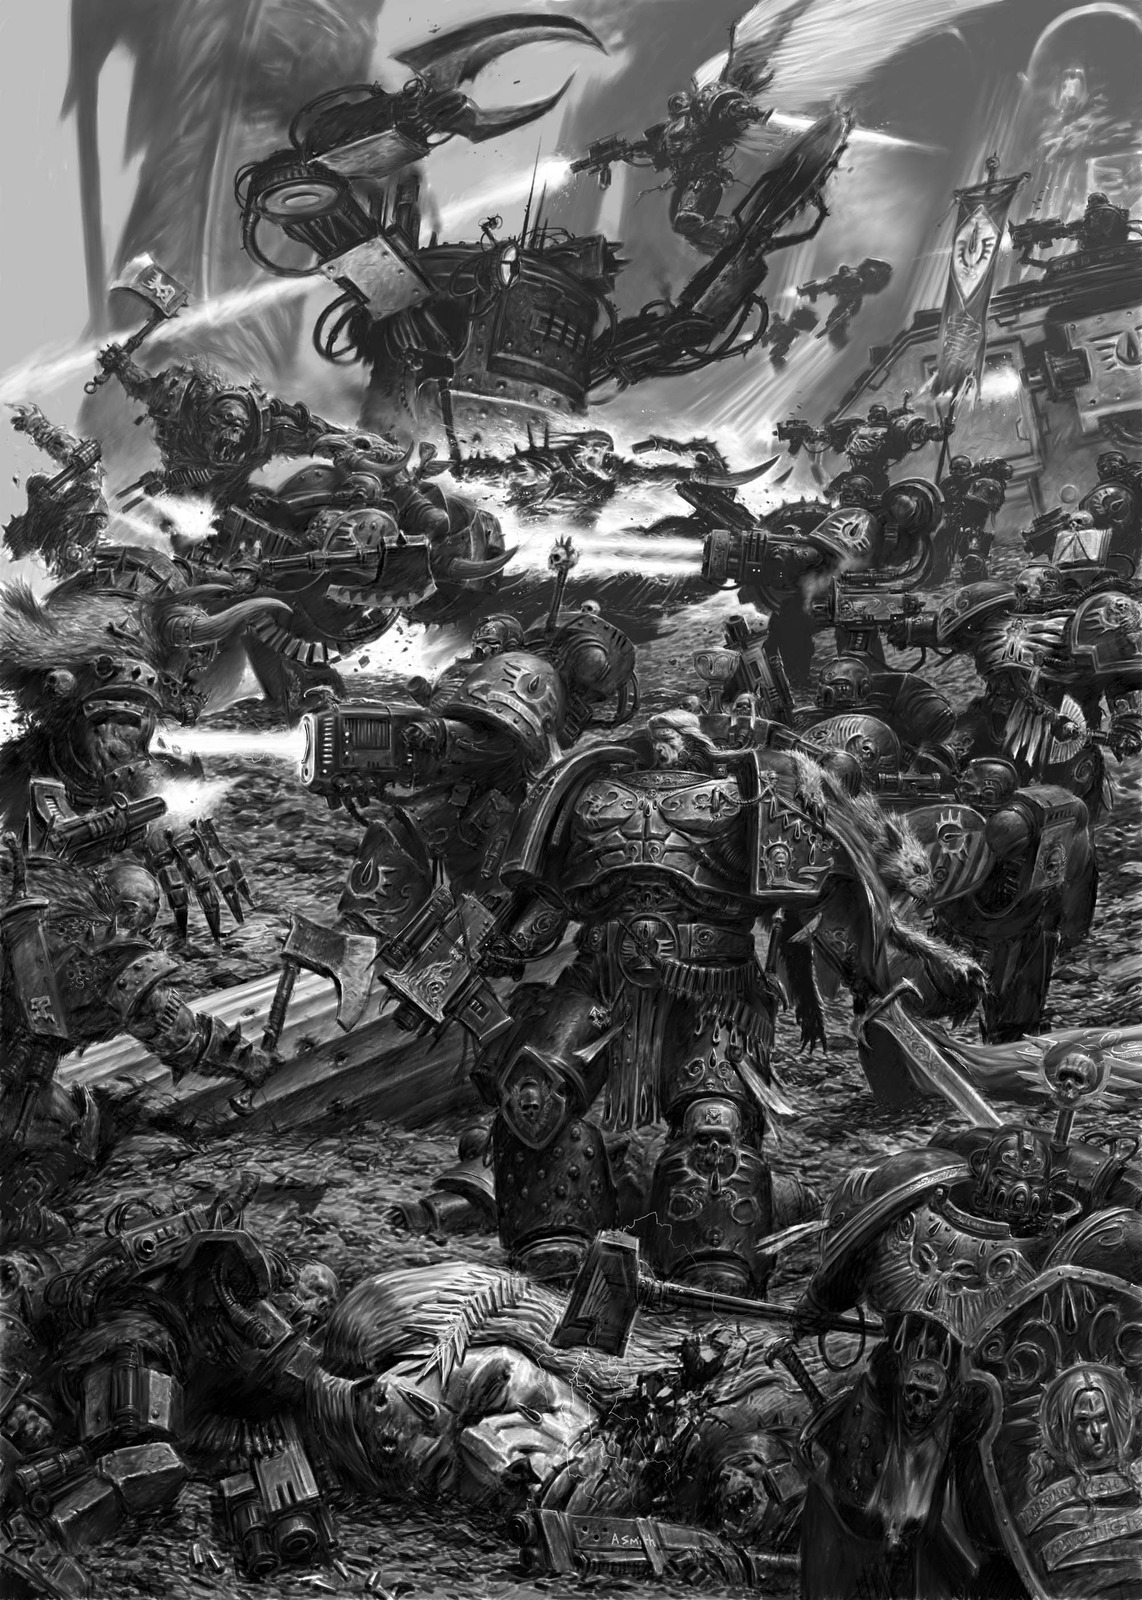 Fine Art: Happy New Year… For The Emperor!